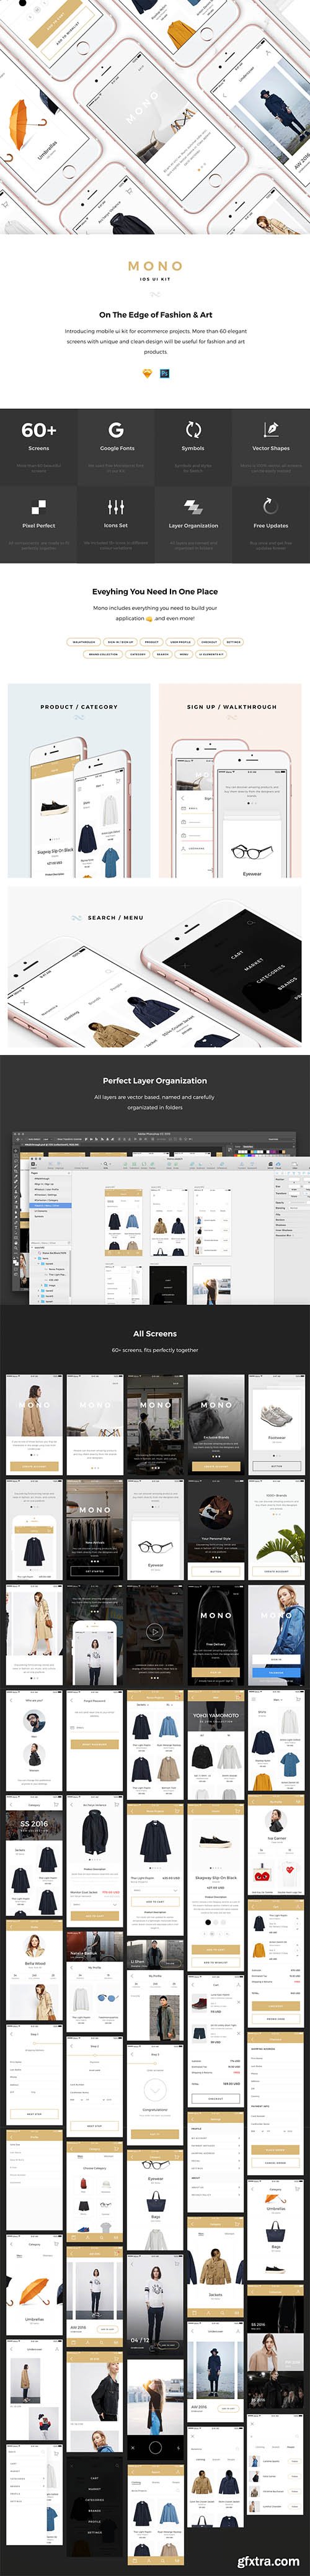 Mono iOS UI Kit - 60+ Mobile screens for e-commerce projects